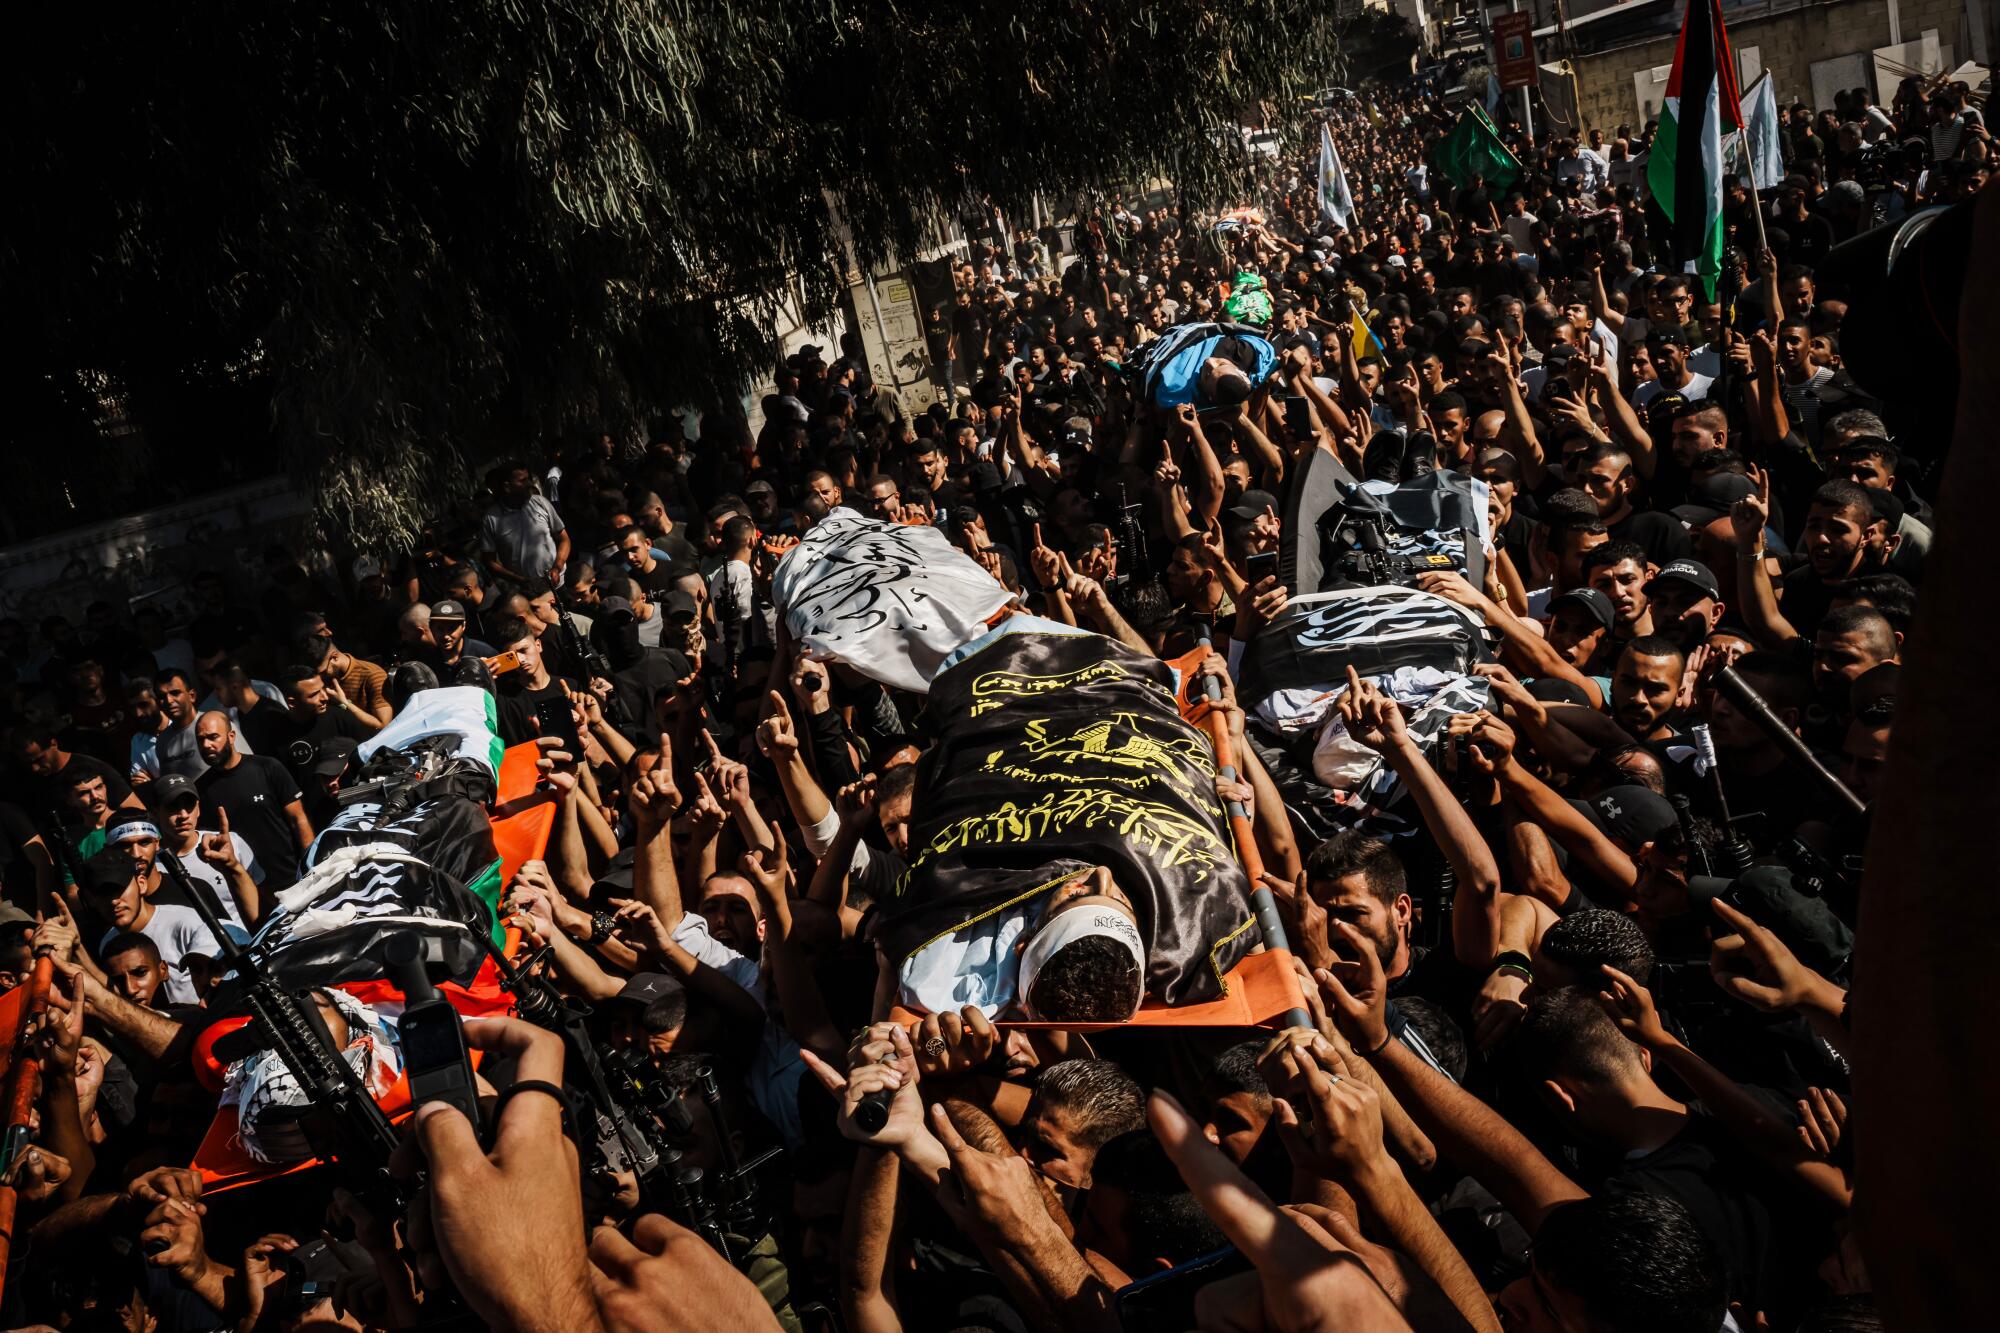 Hands are raised to carry the bodies of the dead wrapped in cloth at a mass funeral.